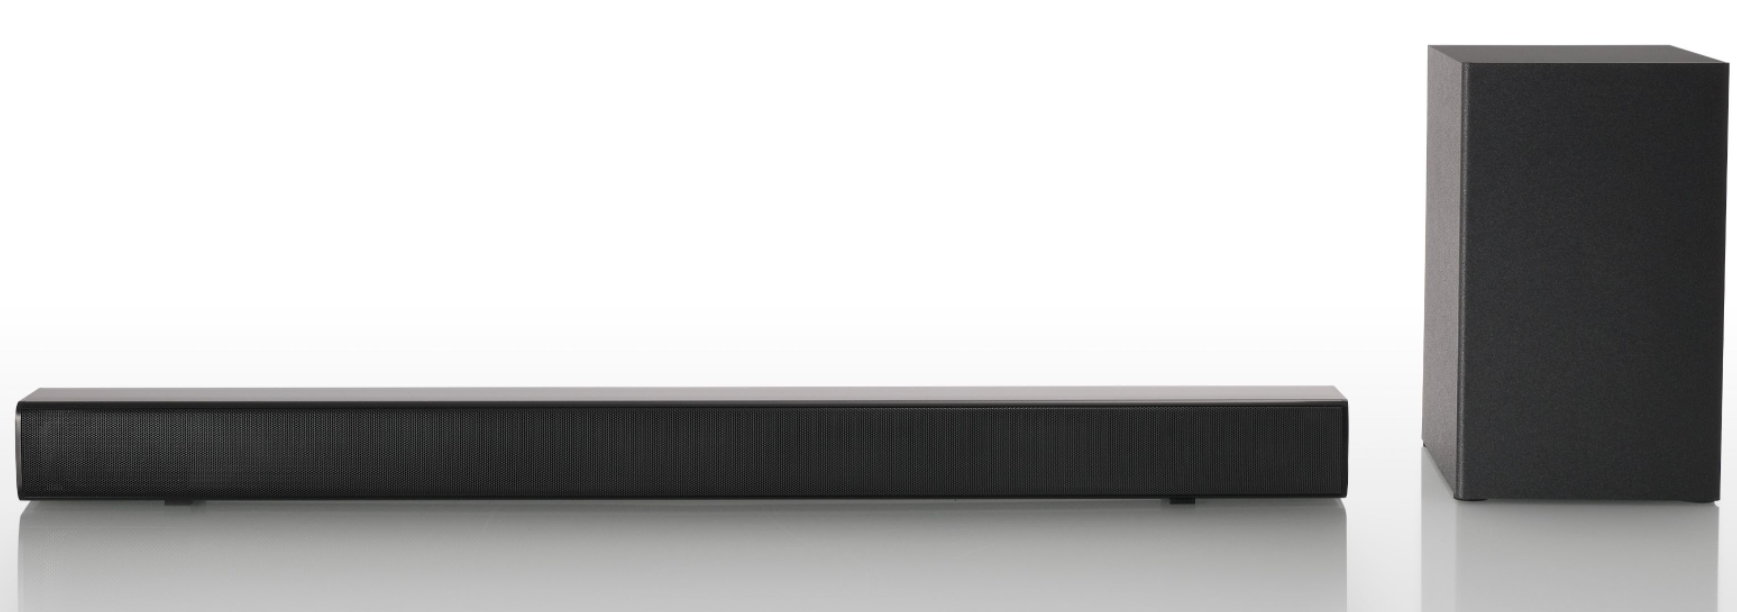 Panasonic HTB150, a sound bar with a subwoofer and a contained price 29